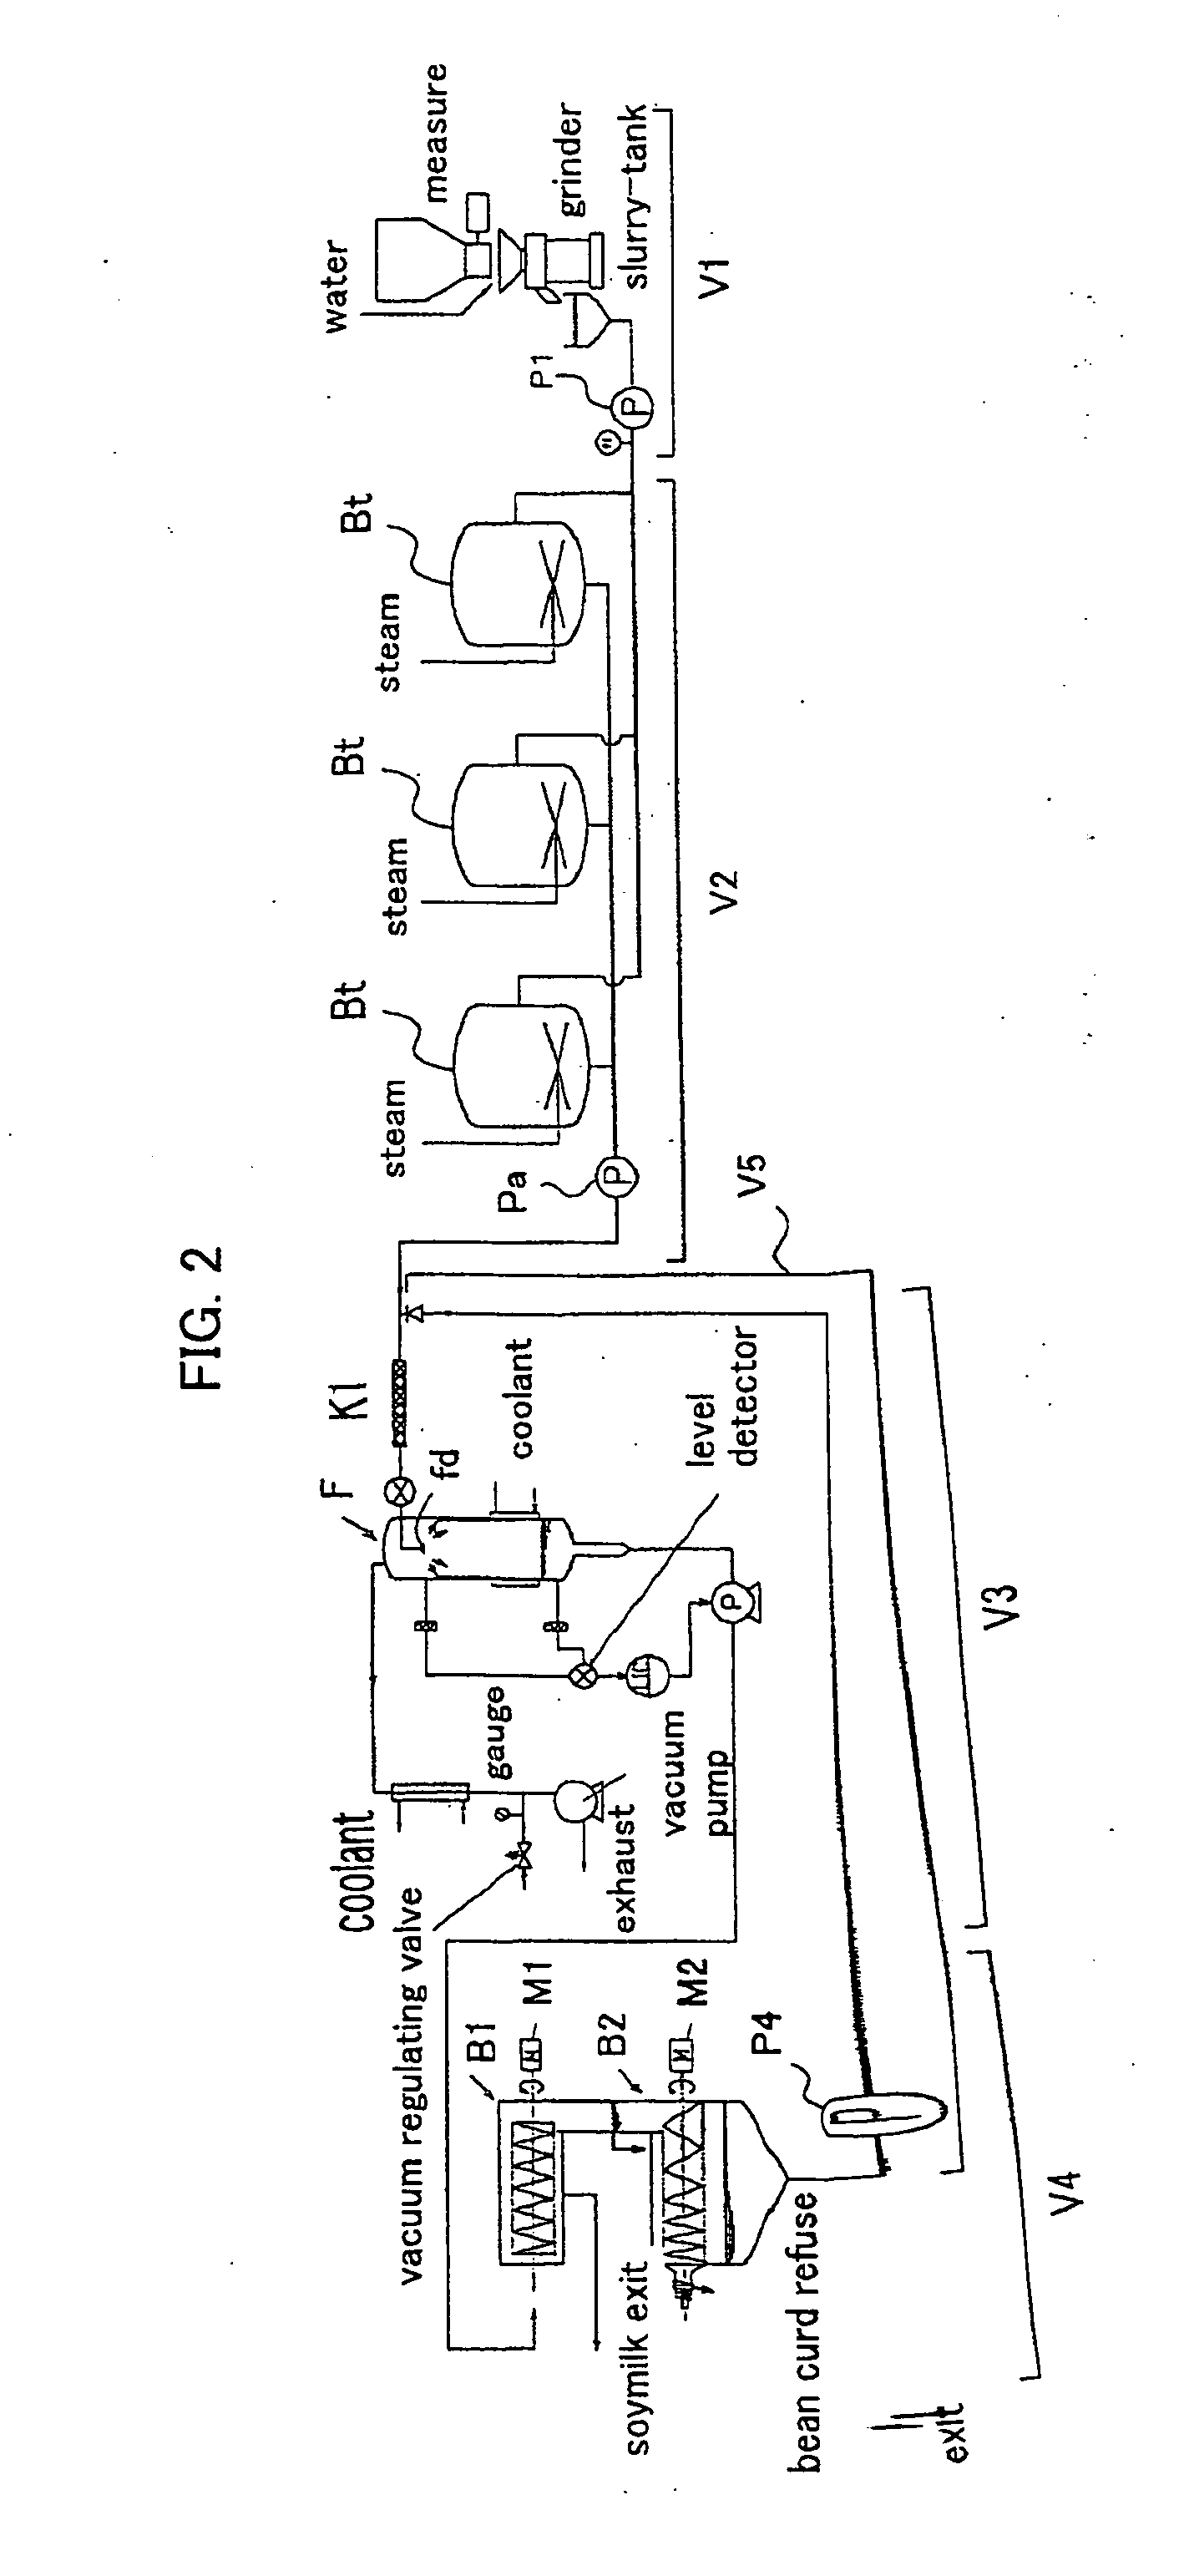 Process for producing soymilk and apparatus for producing soymilk